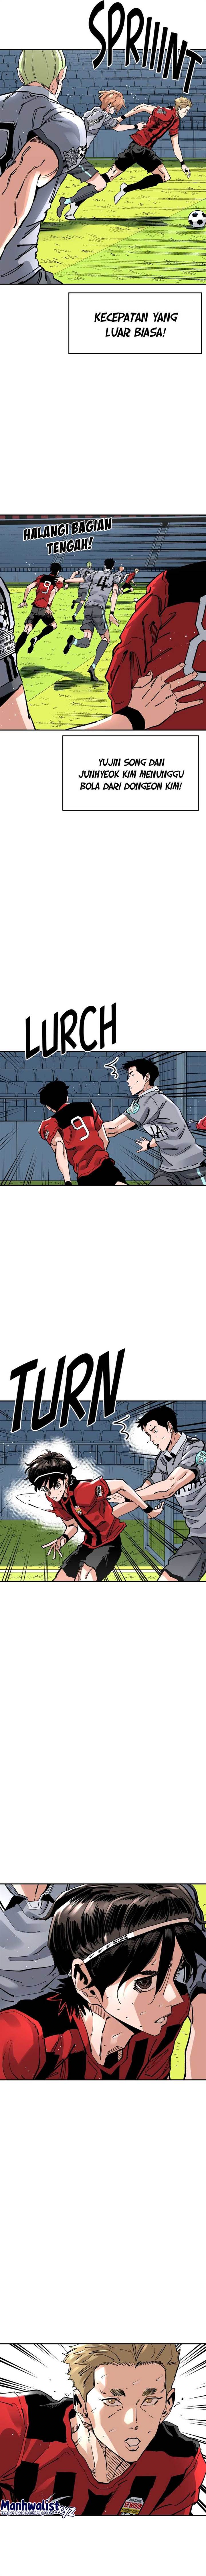 Build Up Chapter 142